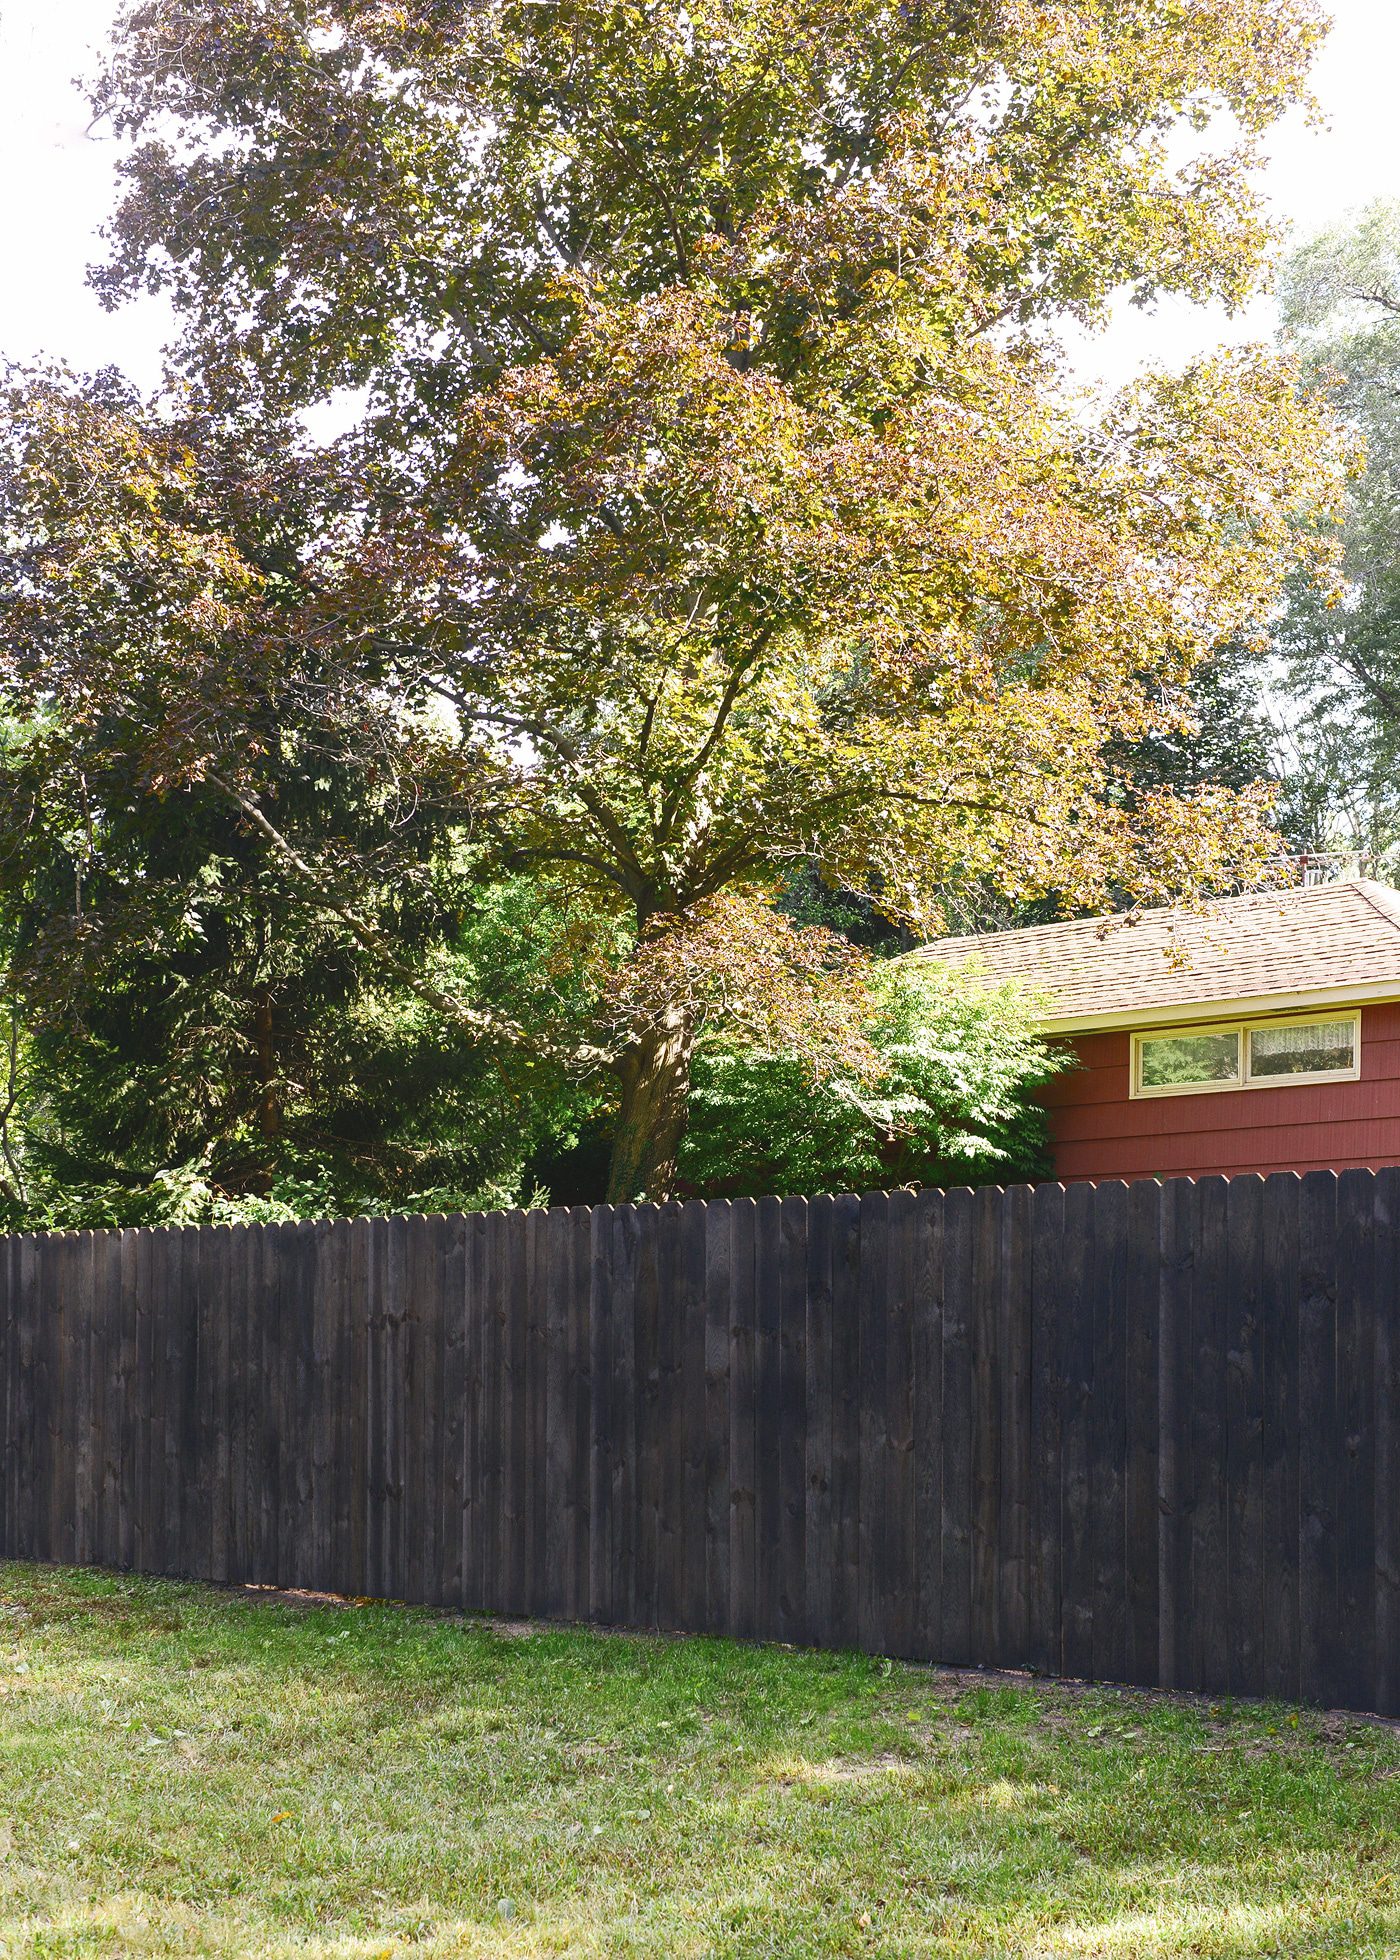 How we stained our fence black! via Yellow Brick Home